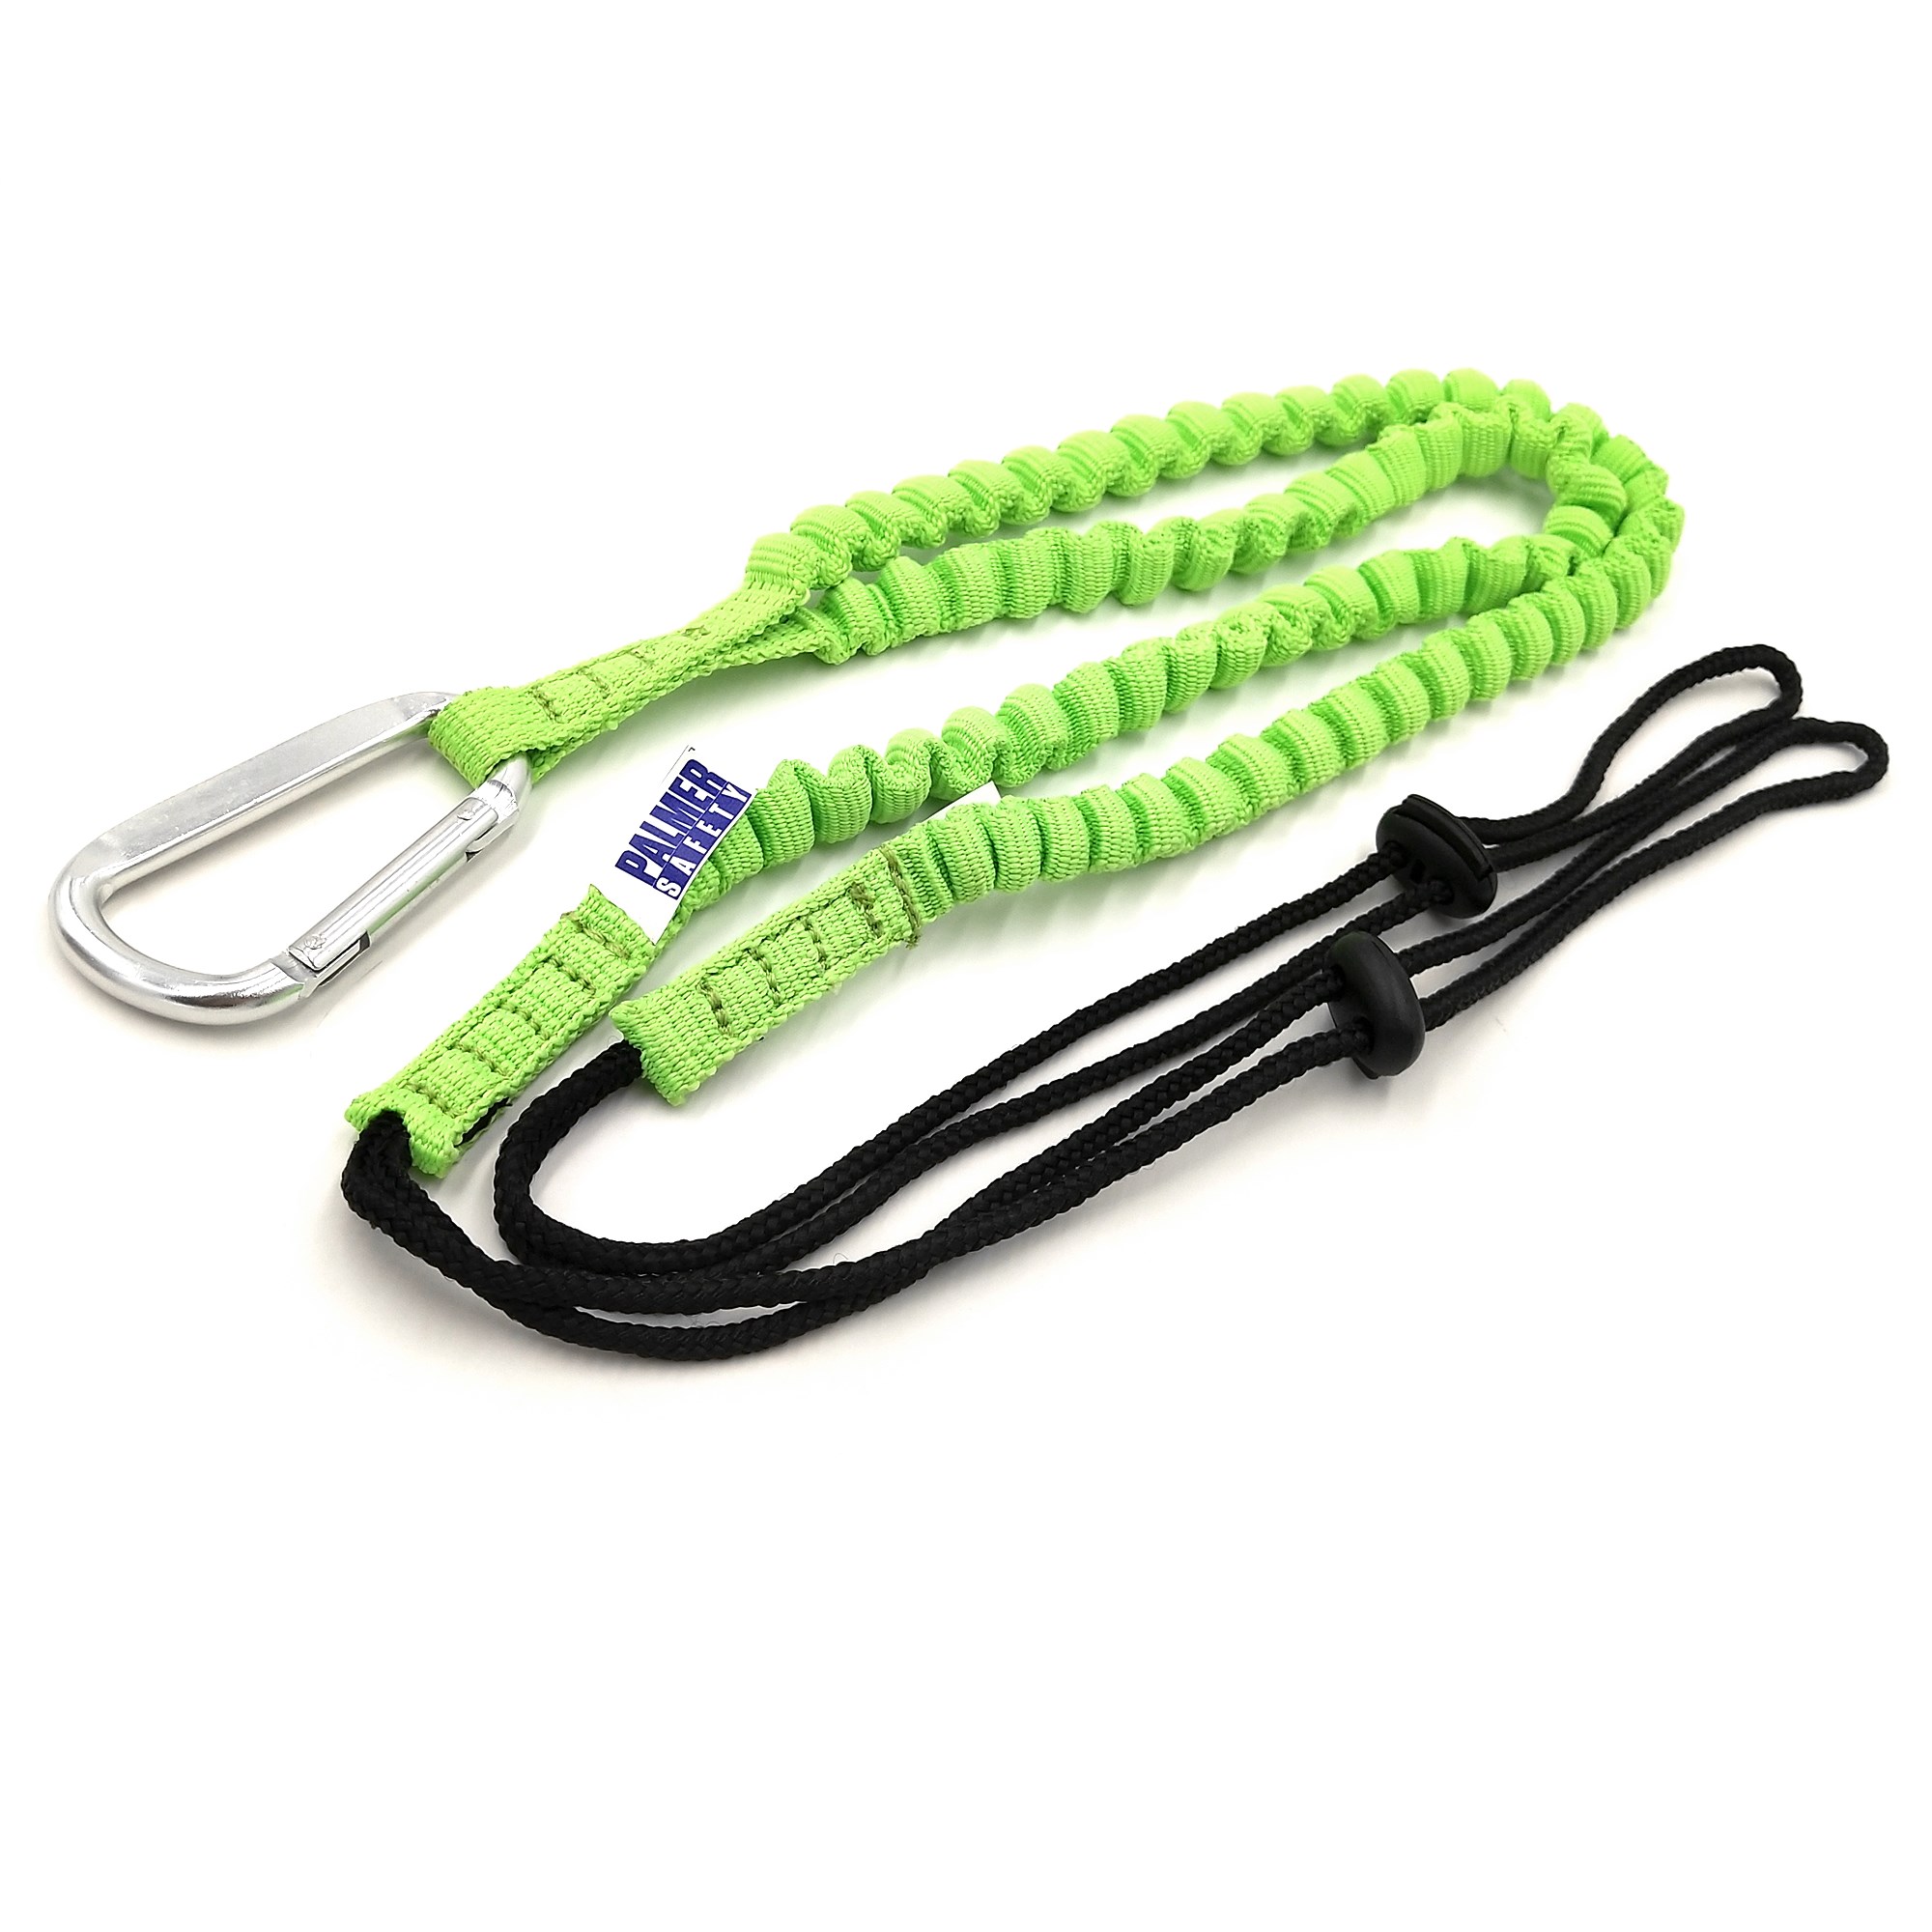 2020 New Coming Hot Sale Best Quality Retractable Tool Lanyard with Carabiner